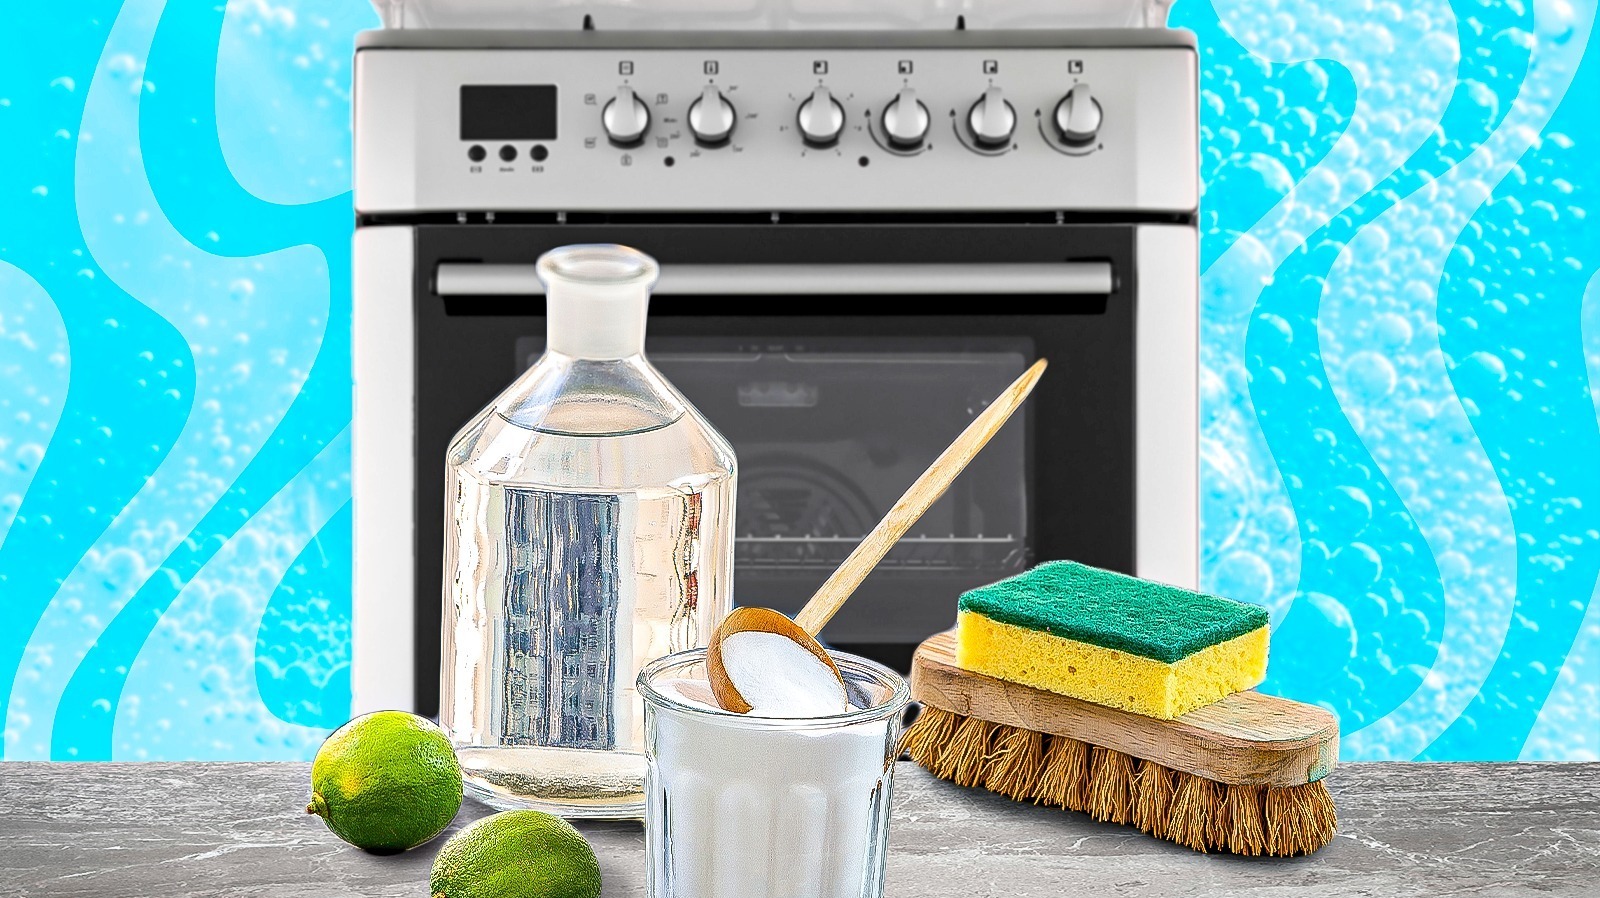 Before and After Photos: TikTok Lemon Oven Cleaning Hack Works